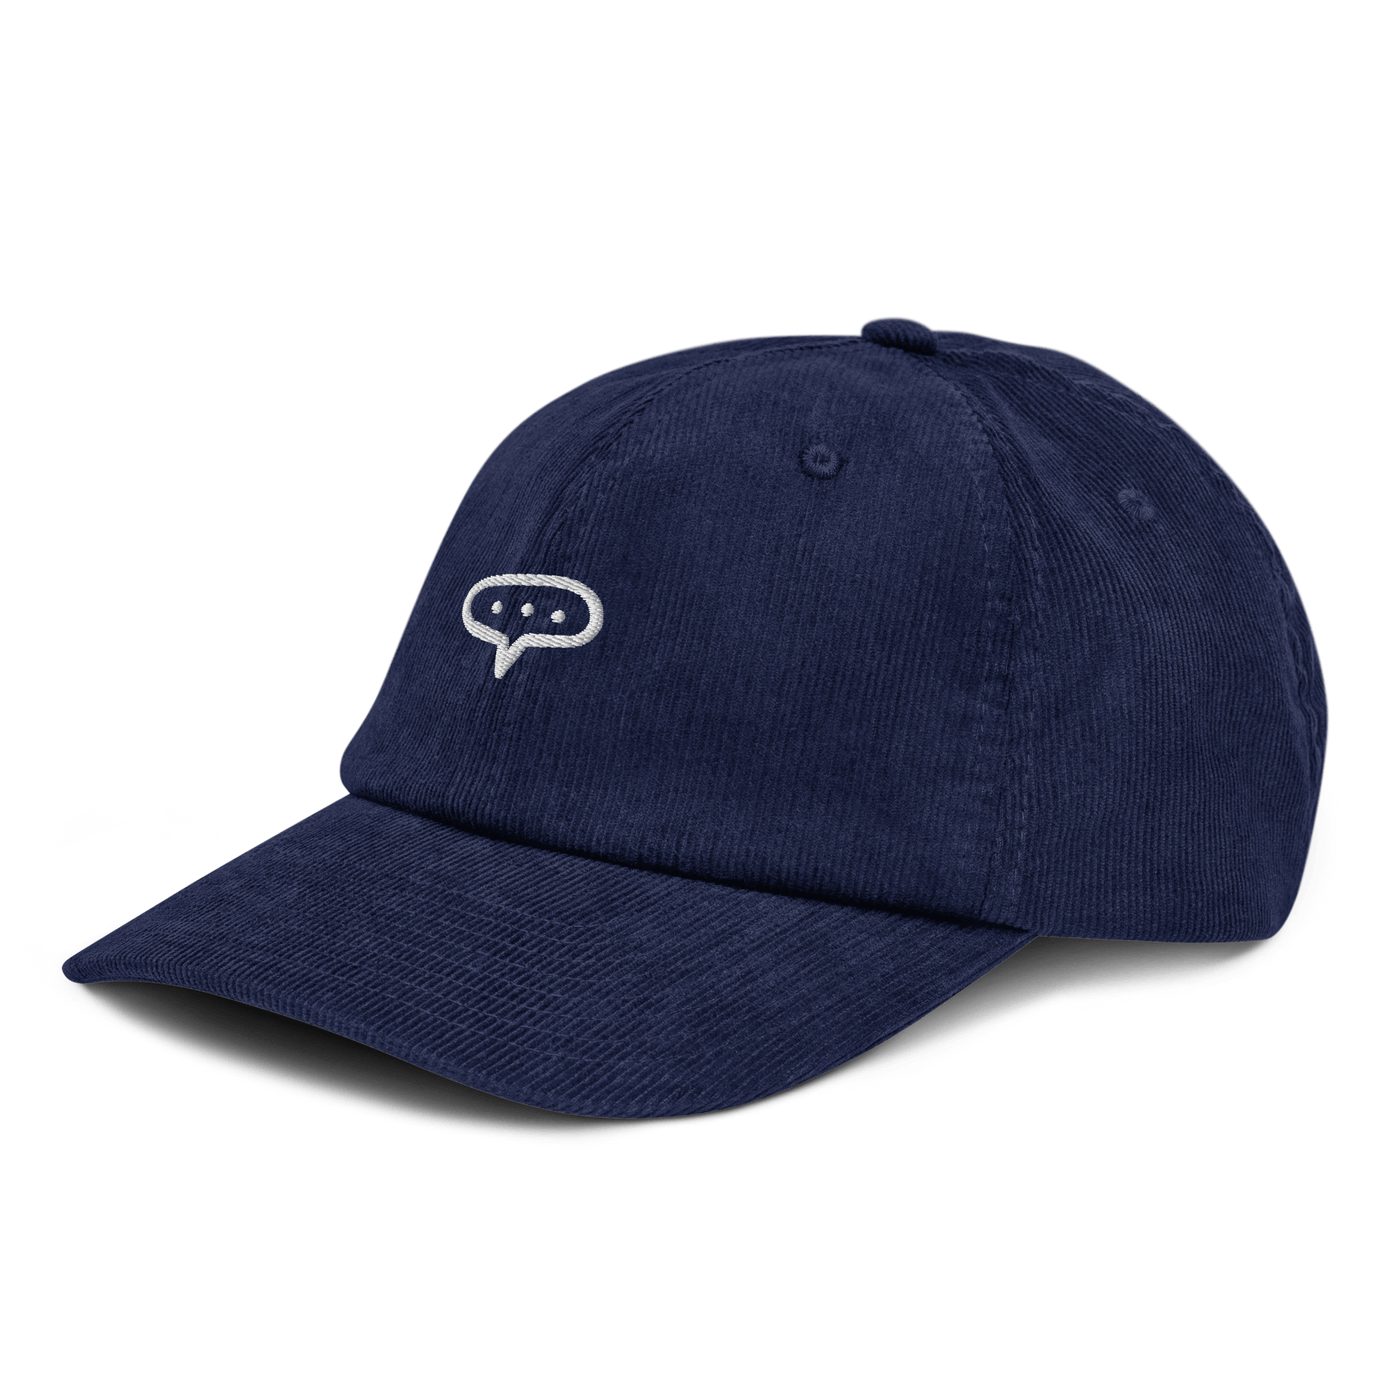 Thinking Corduroy hat - Oxford Navy - - Just Another Cap Store